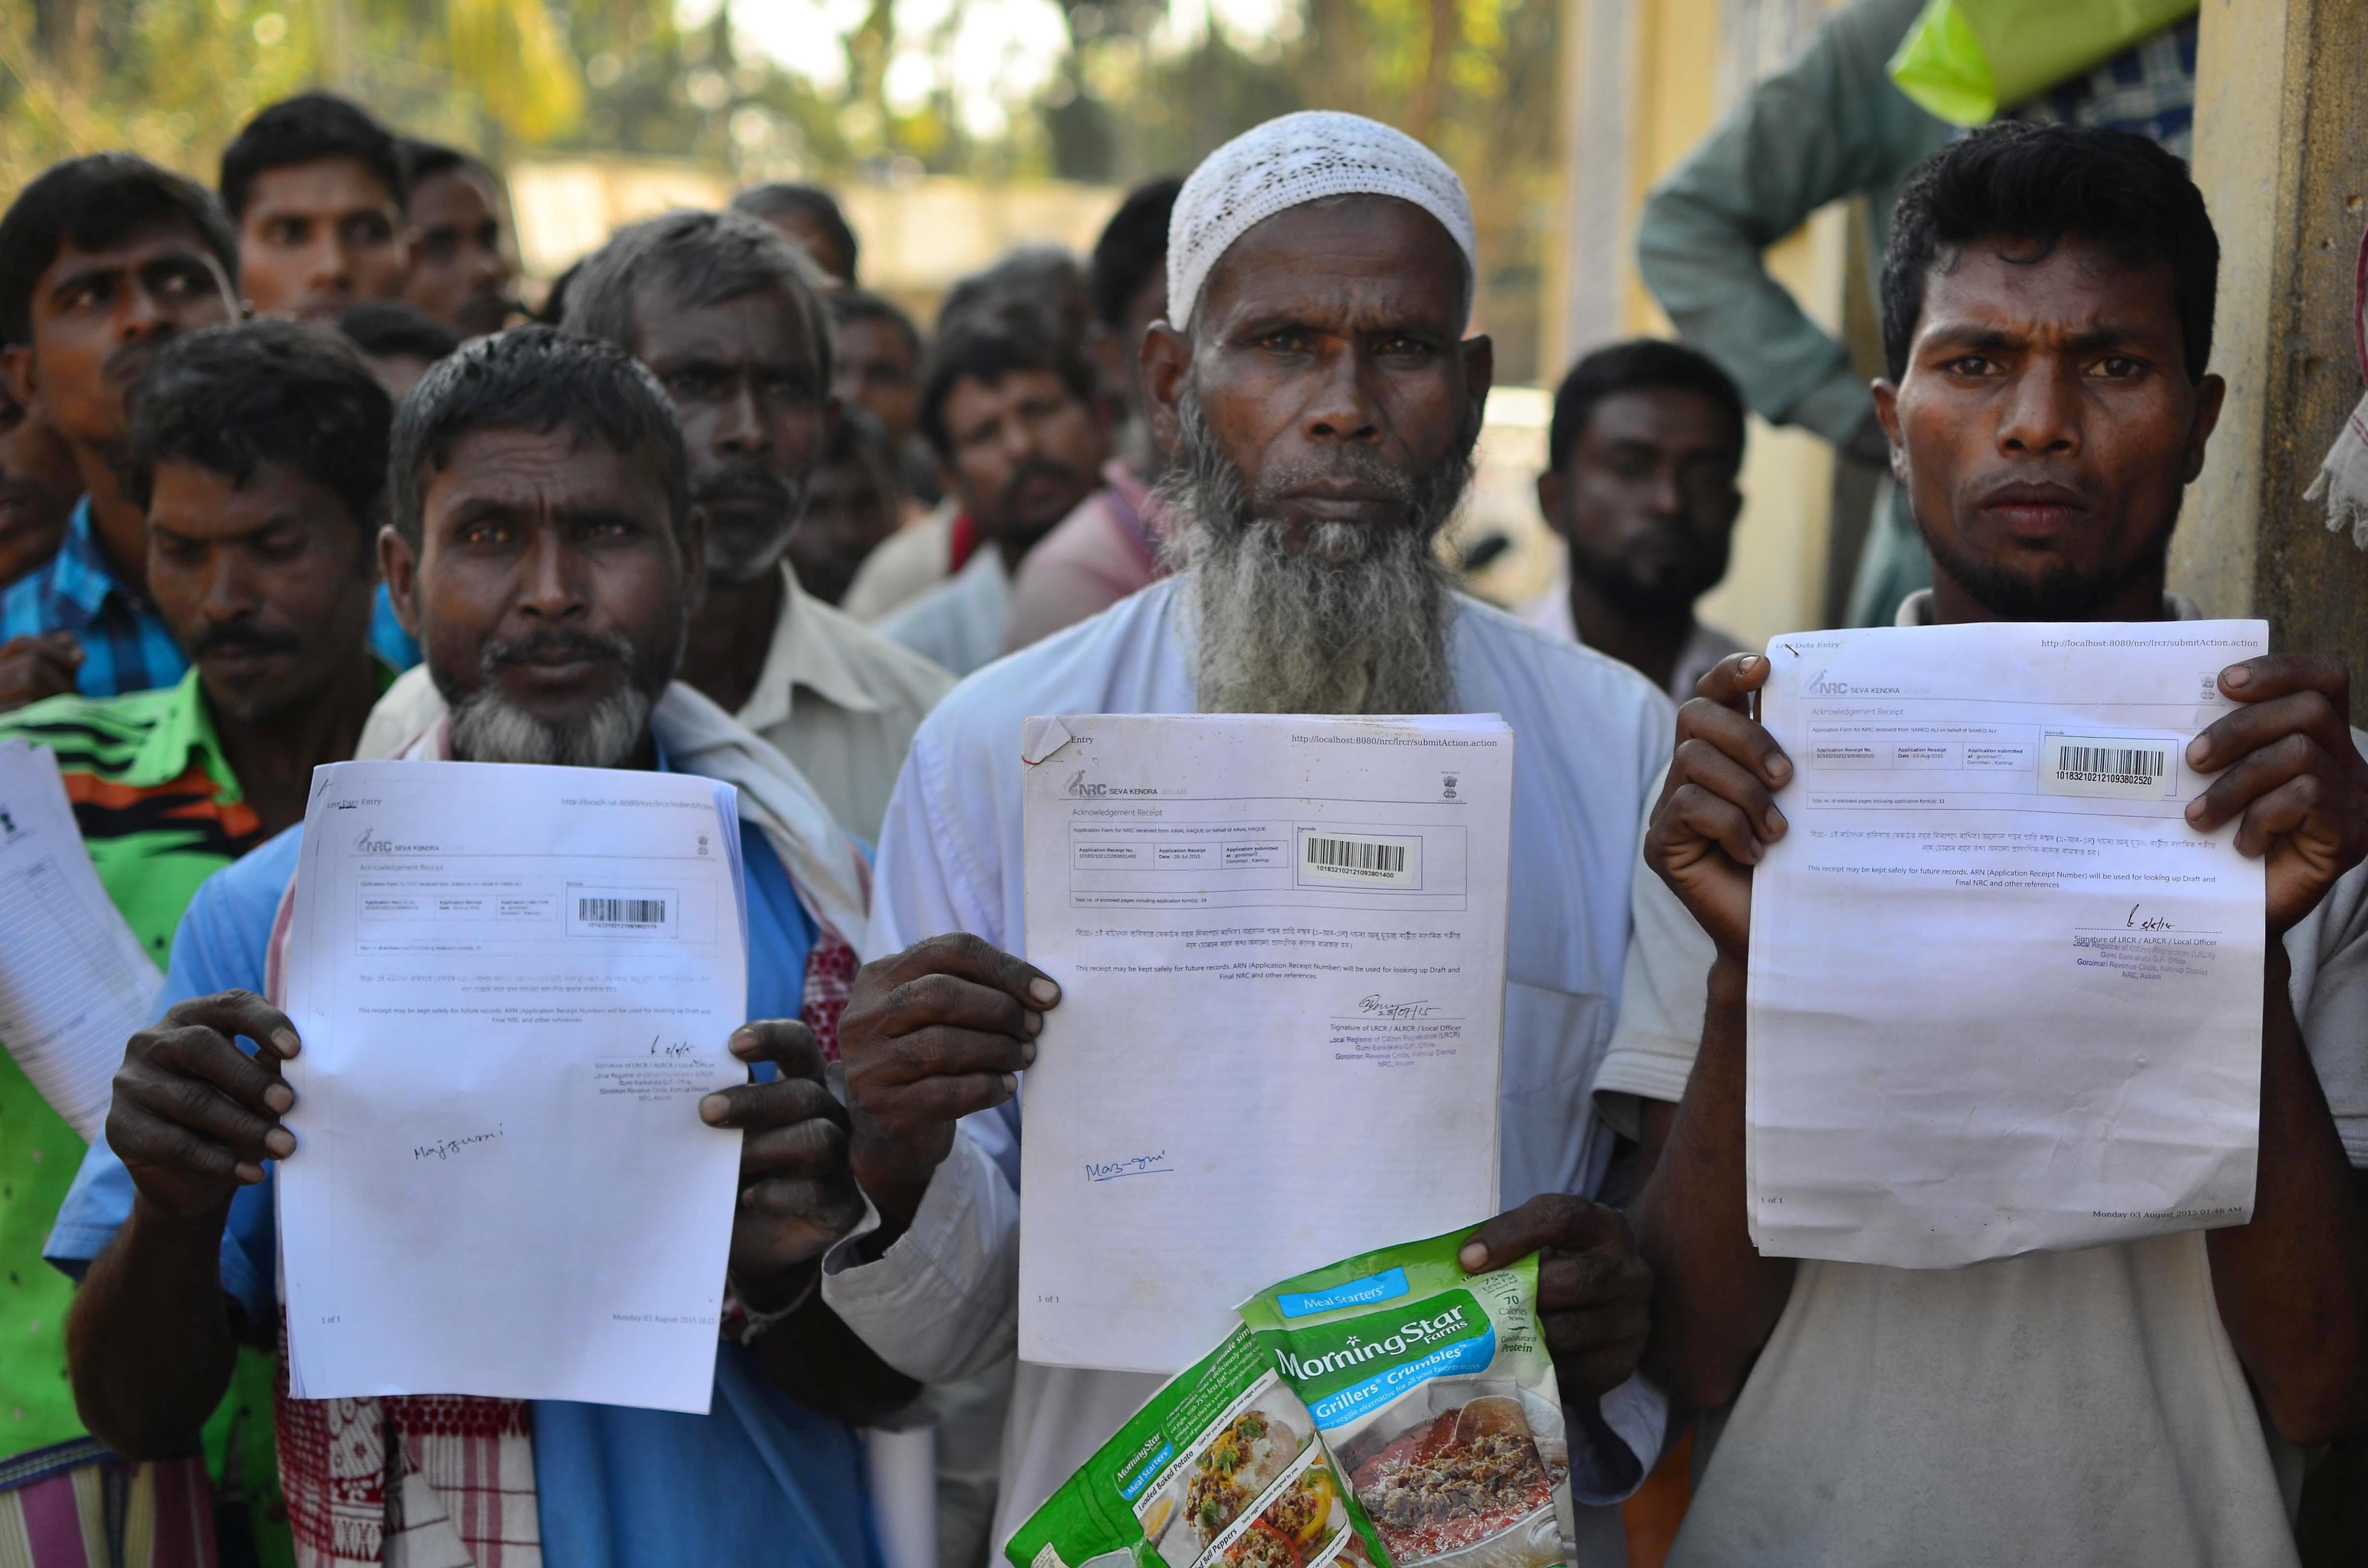 Kamrup: People show their acknowledgement receipts after checking their names in a draft for National Register of Citizens (NRC), in Guwahati on Monday. PTI Photo (PTI1_1_2018_000101B)